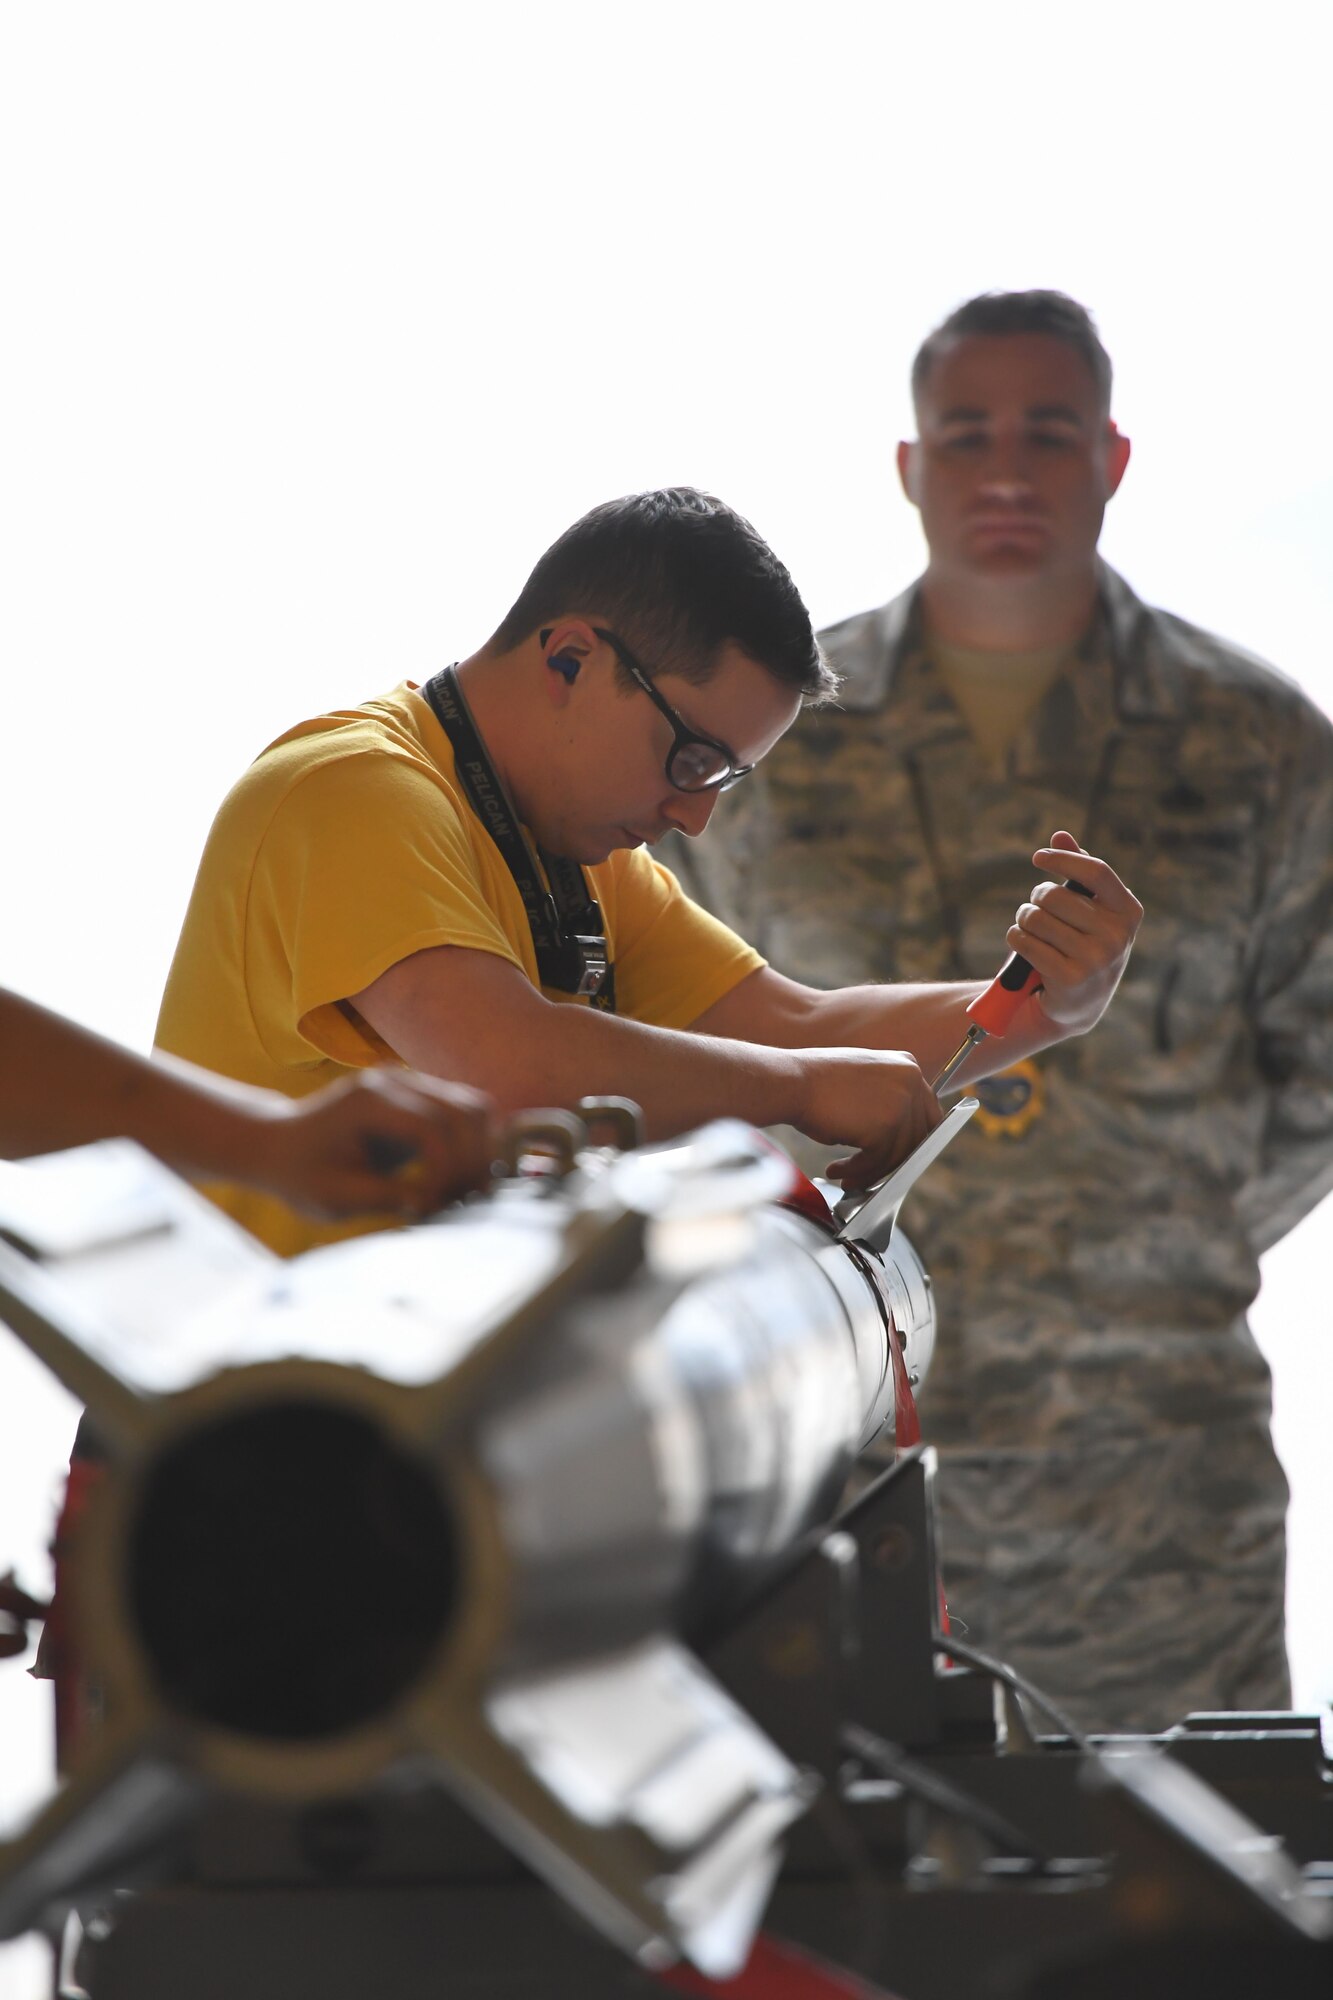 Staff Sgt. Hunter Rivera from the 4th Aircraft Maintenance Unit in the 388th Fighter Wing preps a GBU-12 laser guided bomb during the F-35A weapons loading competition Jan. 19, 2018, at Hill Air Force Base, Utah. These competitions benefit Airmen by honing their specialty skills and bolsters comradery and friendly rivalries. (U.S. Air Force photo by Cynthia Griggs)